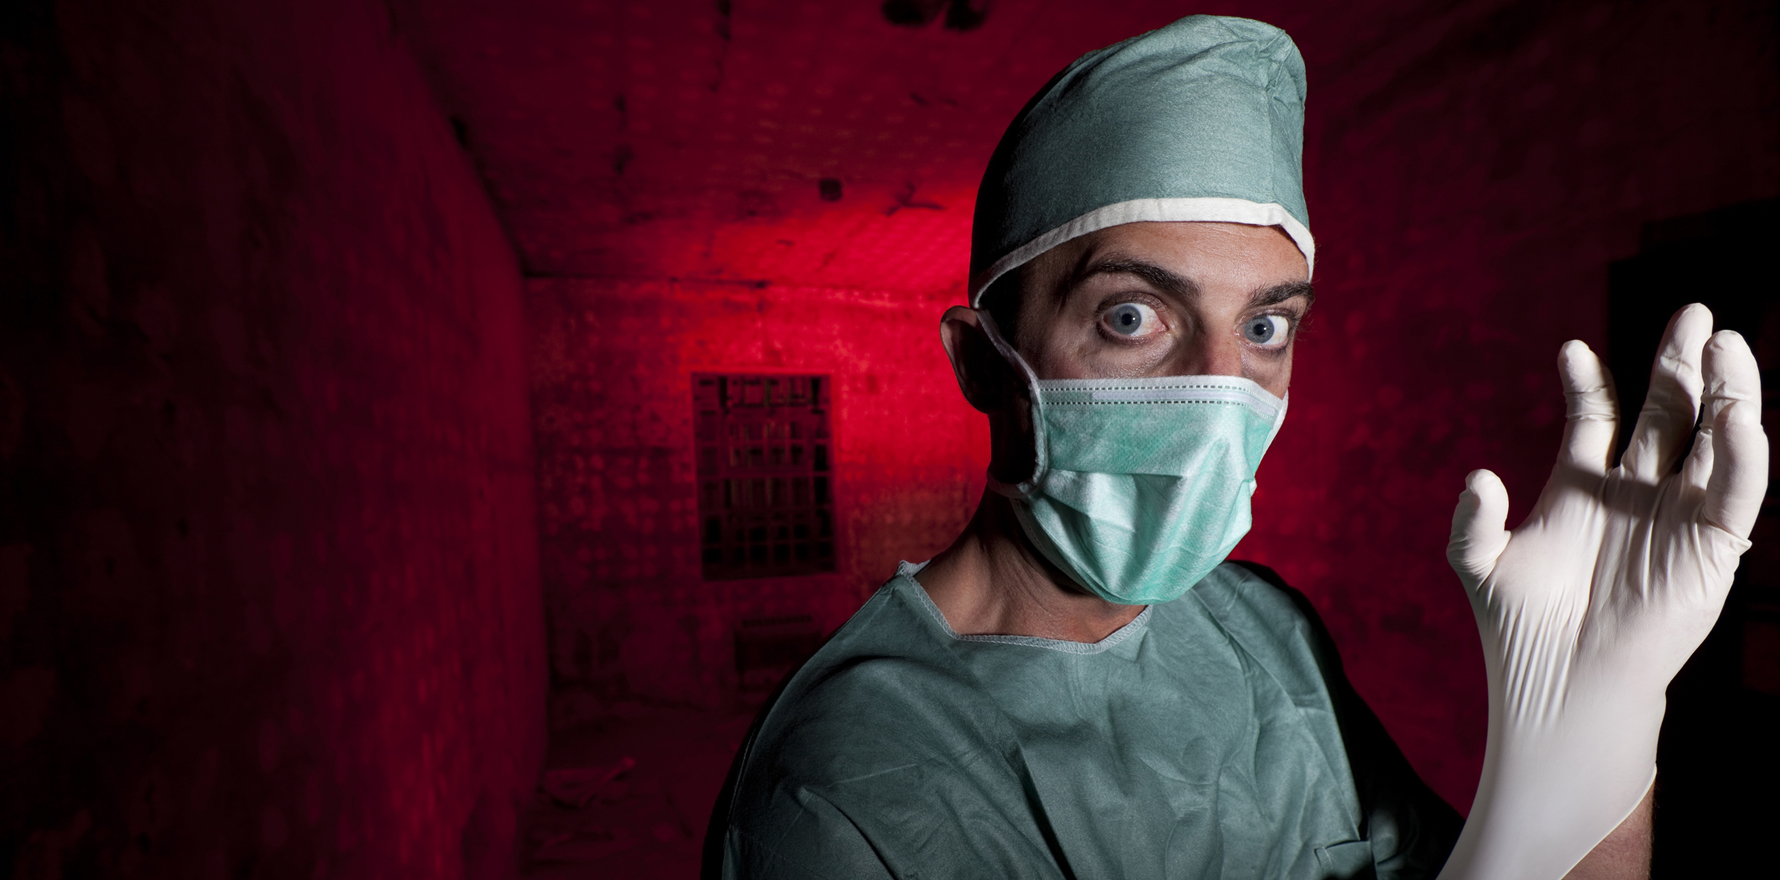 Image: EVIL doctors are wishing unvaccinated patients to DIE, says nurse